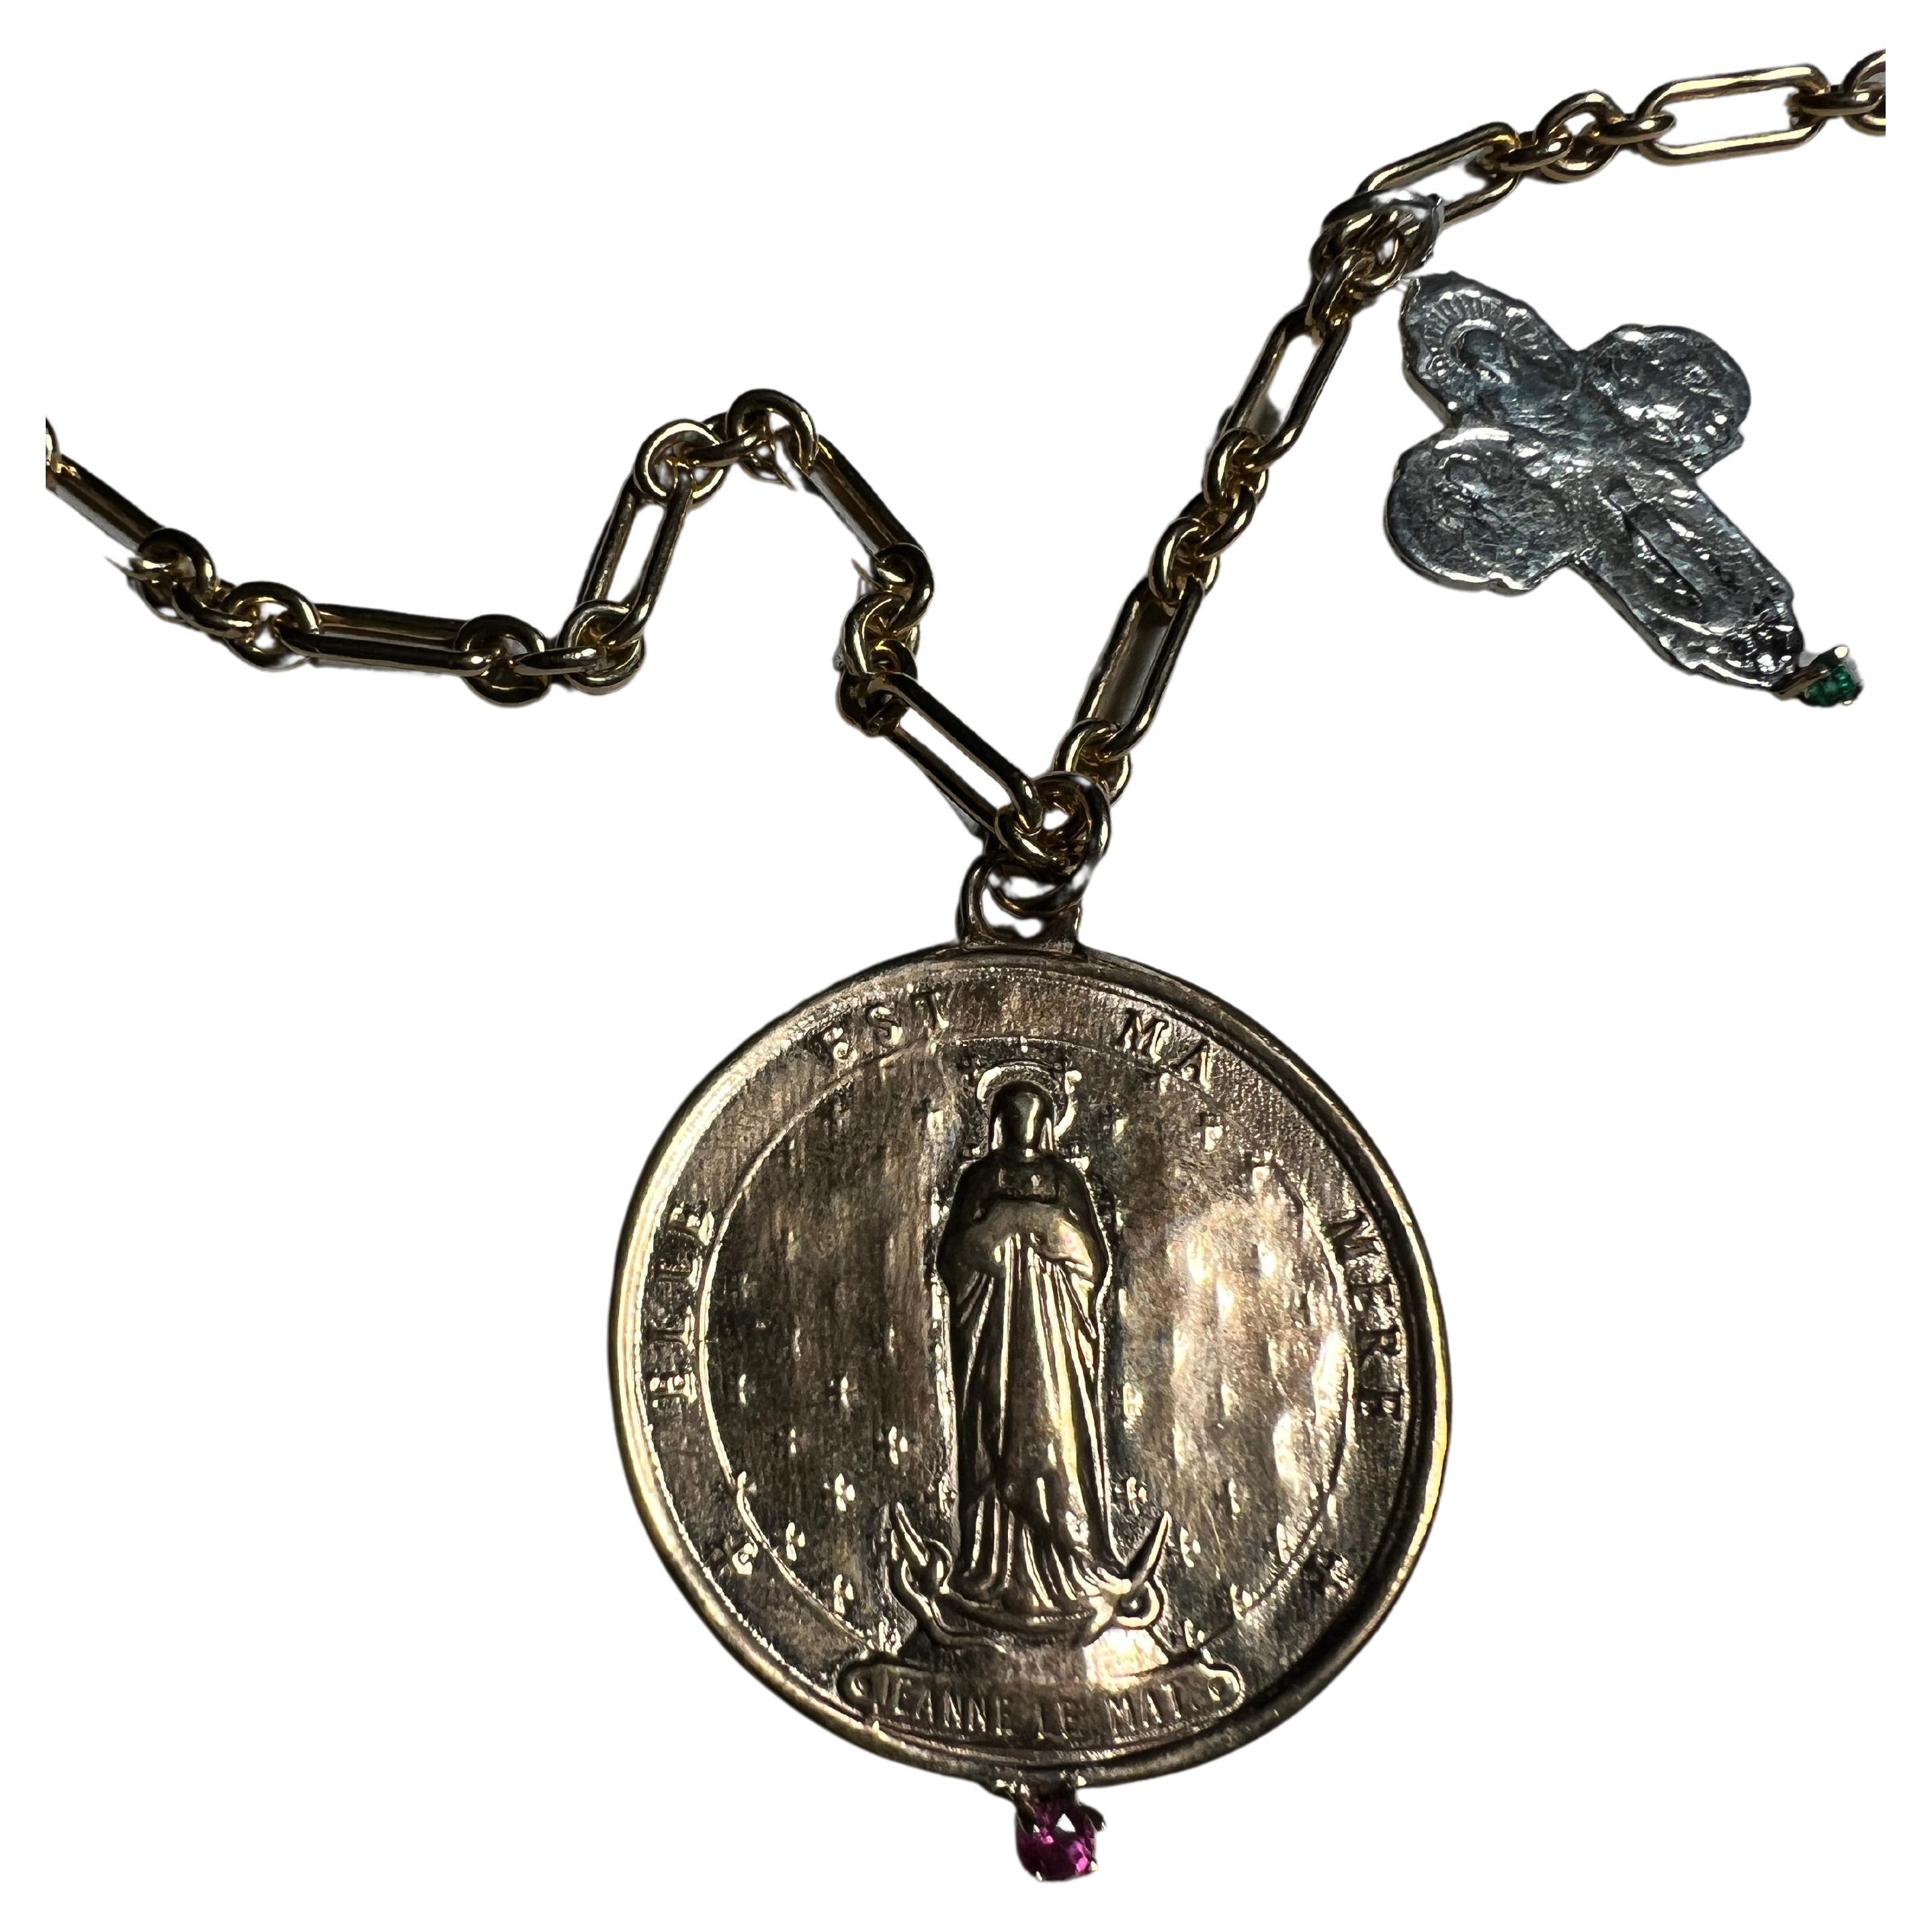 Emerald Prong set Silver Cross and Medal Coin with Jeanne Le Mat holding a Ruby on a Long Gold Filled Chain Necklace by Designer J Dauphin

Exclusive piece with a Round Bronze Medal Coin with French Saint Jeanne Le Mat holding a Ruby and a Silver